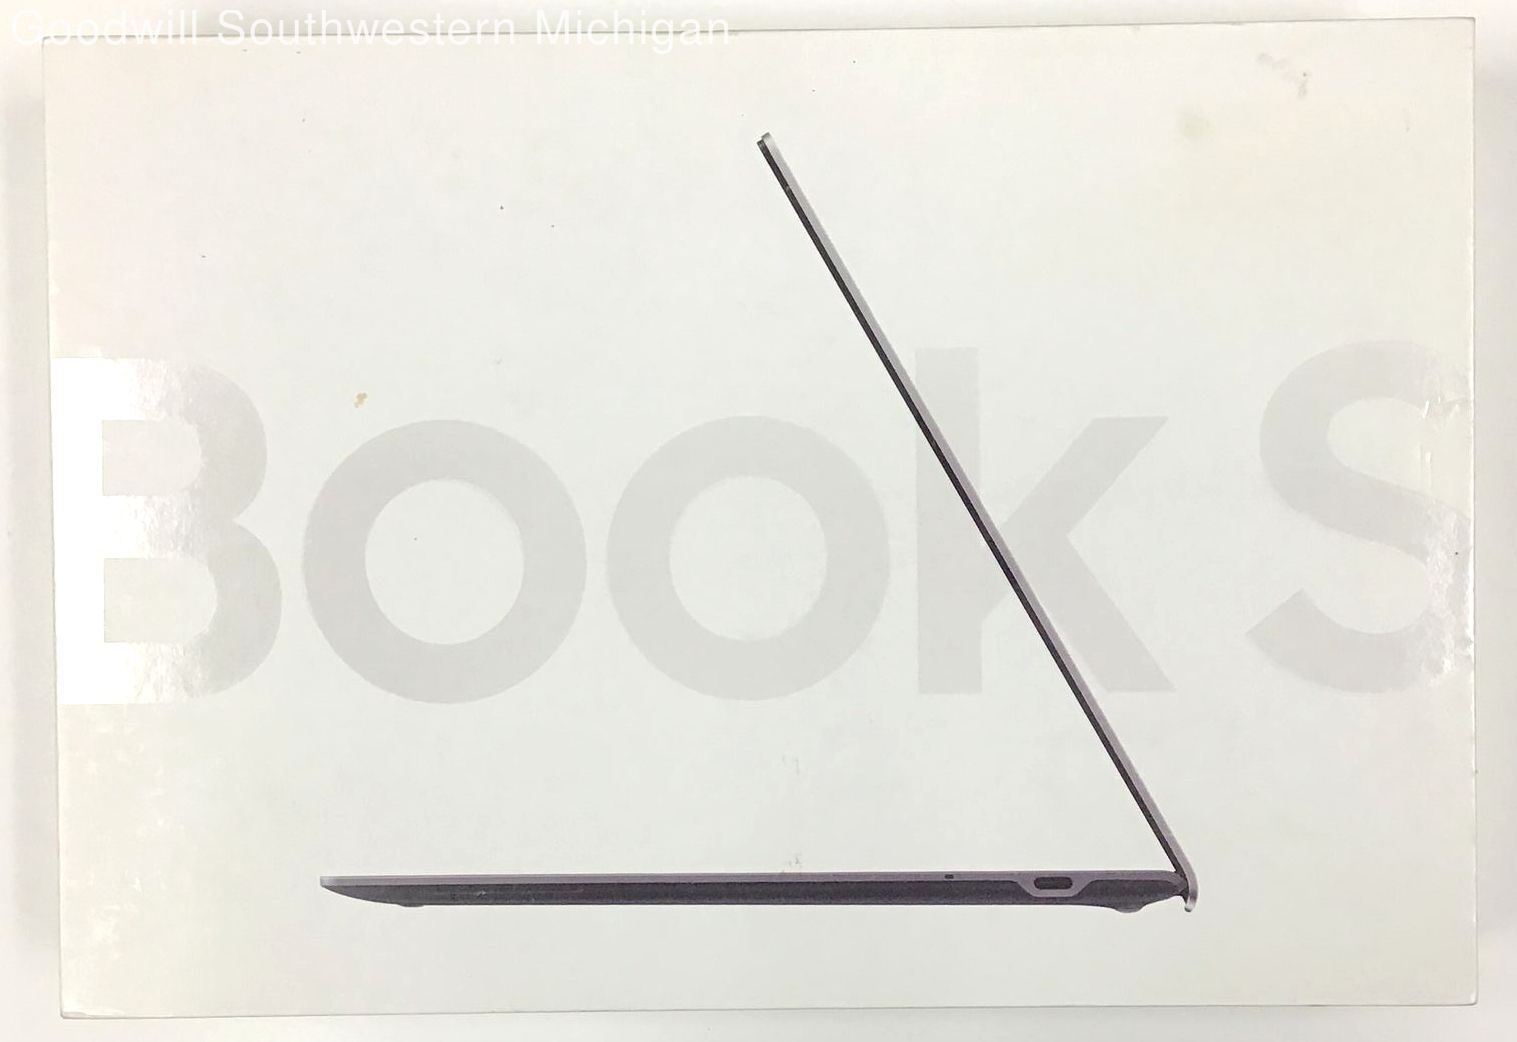 Samsung Galaxy Book S - PreOwned/Used - Powers On - Missing Pieces - **READ